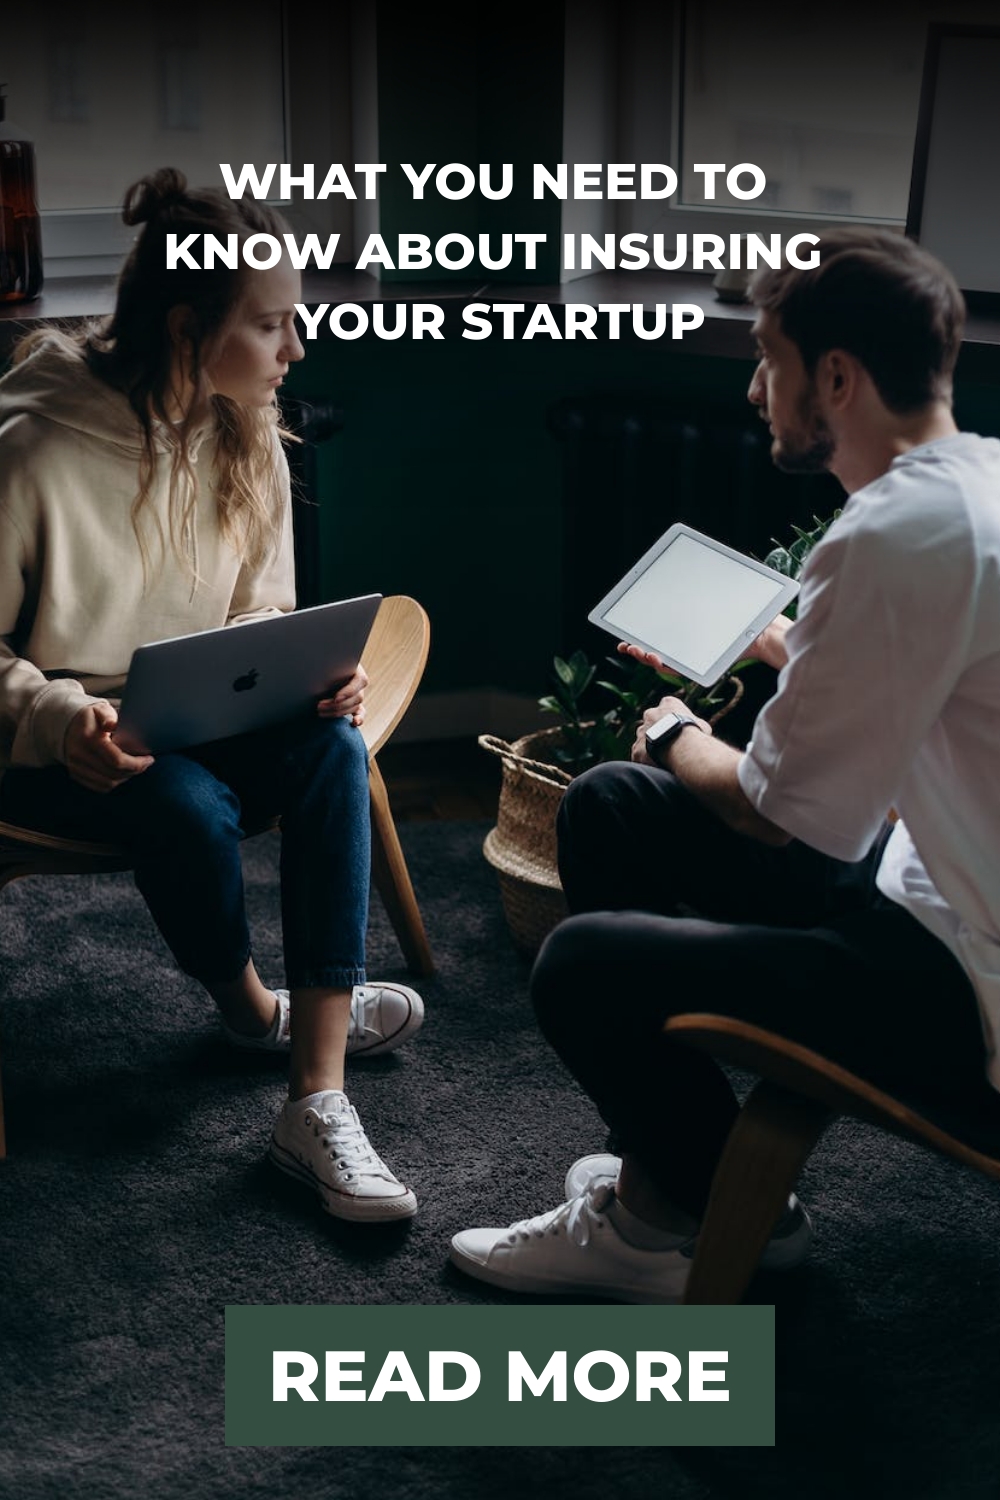 What You Need to Know About Insuring Your Startup